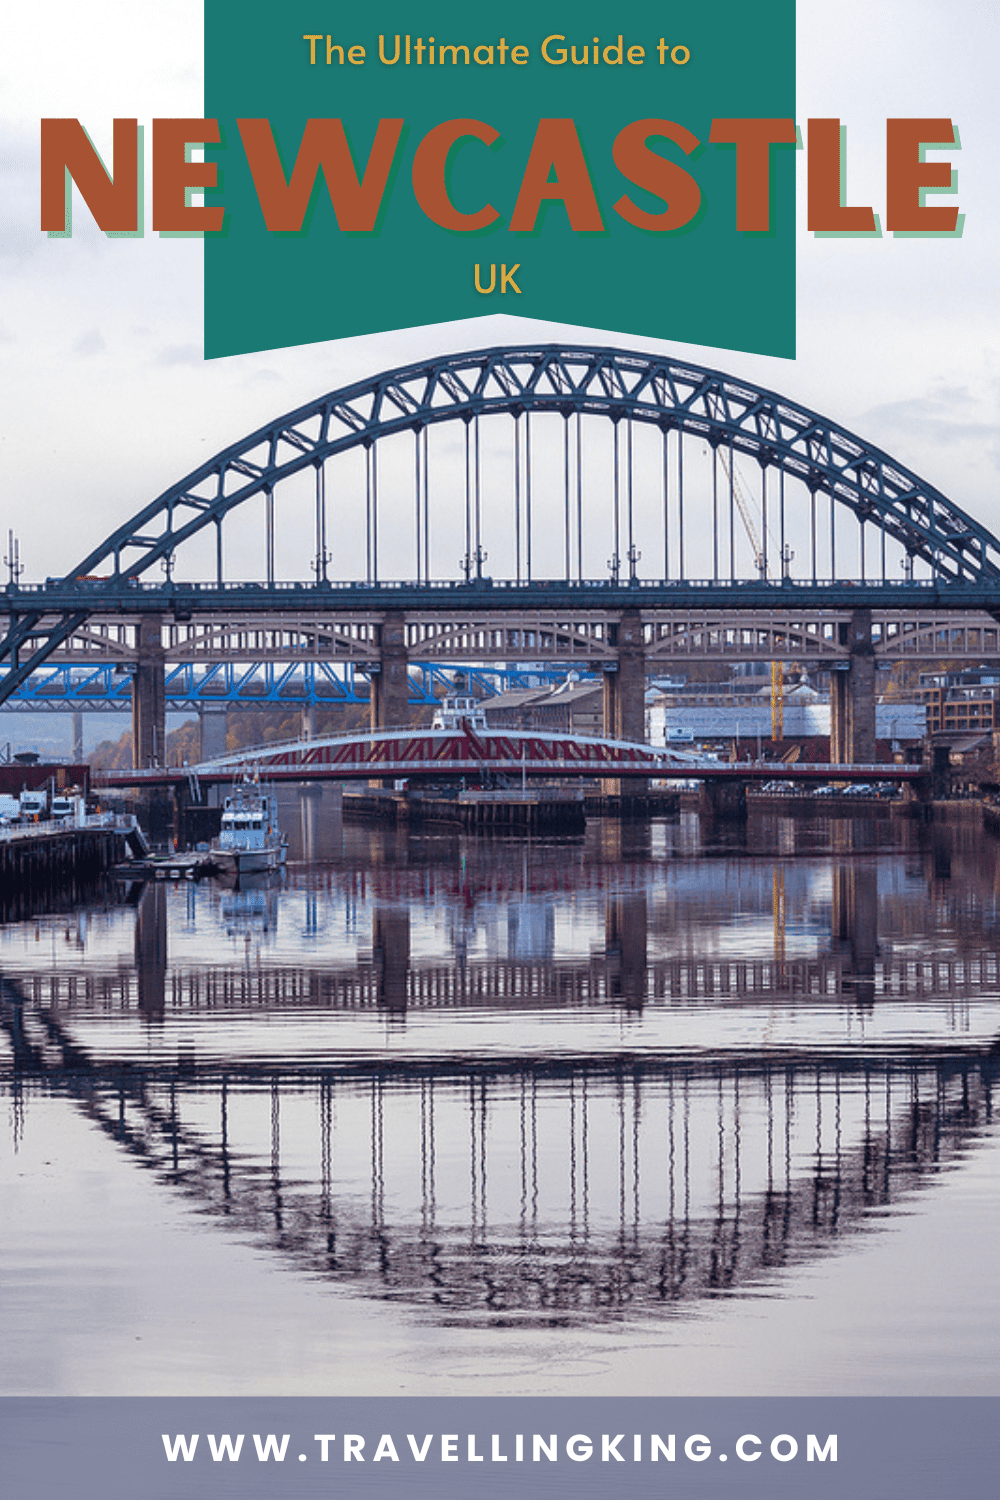 The Ultimate Guide to Newcastle UK